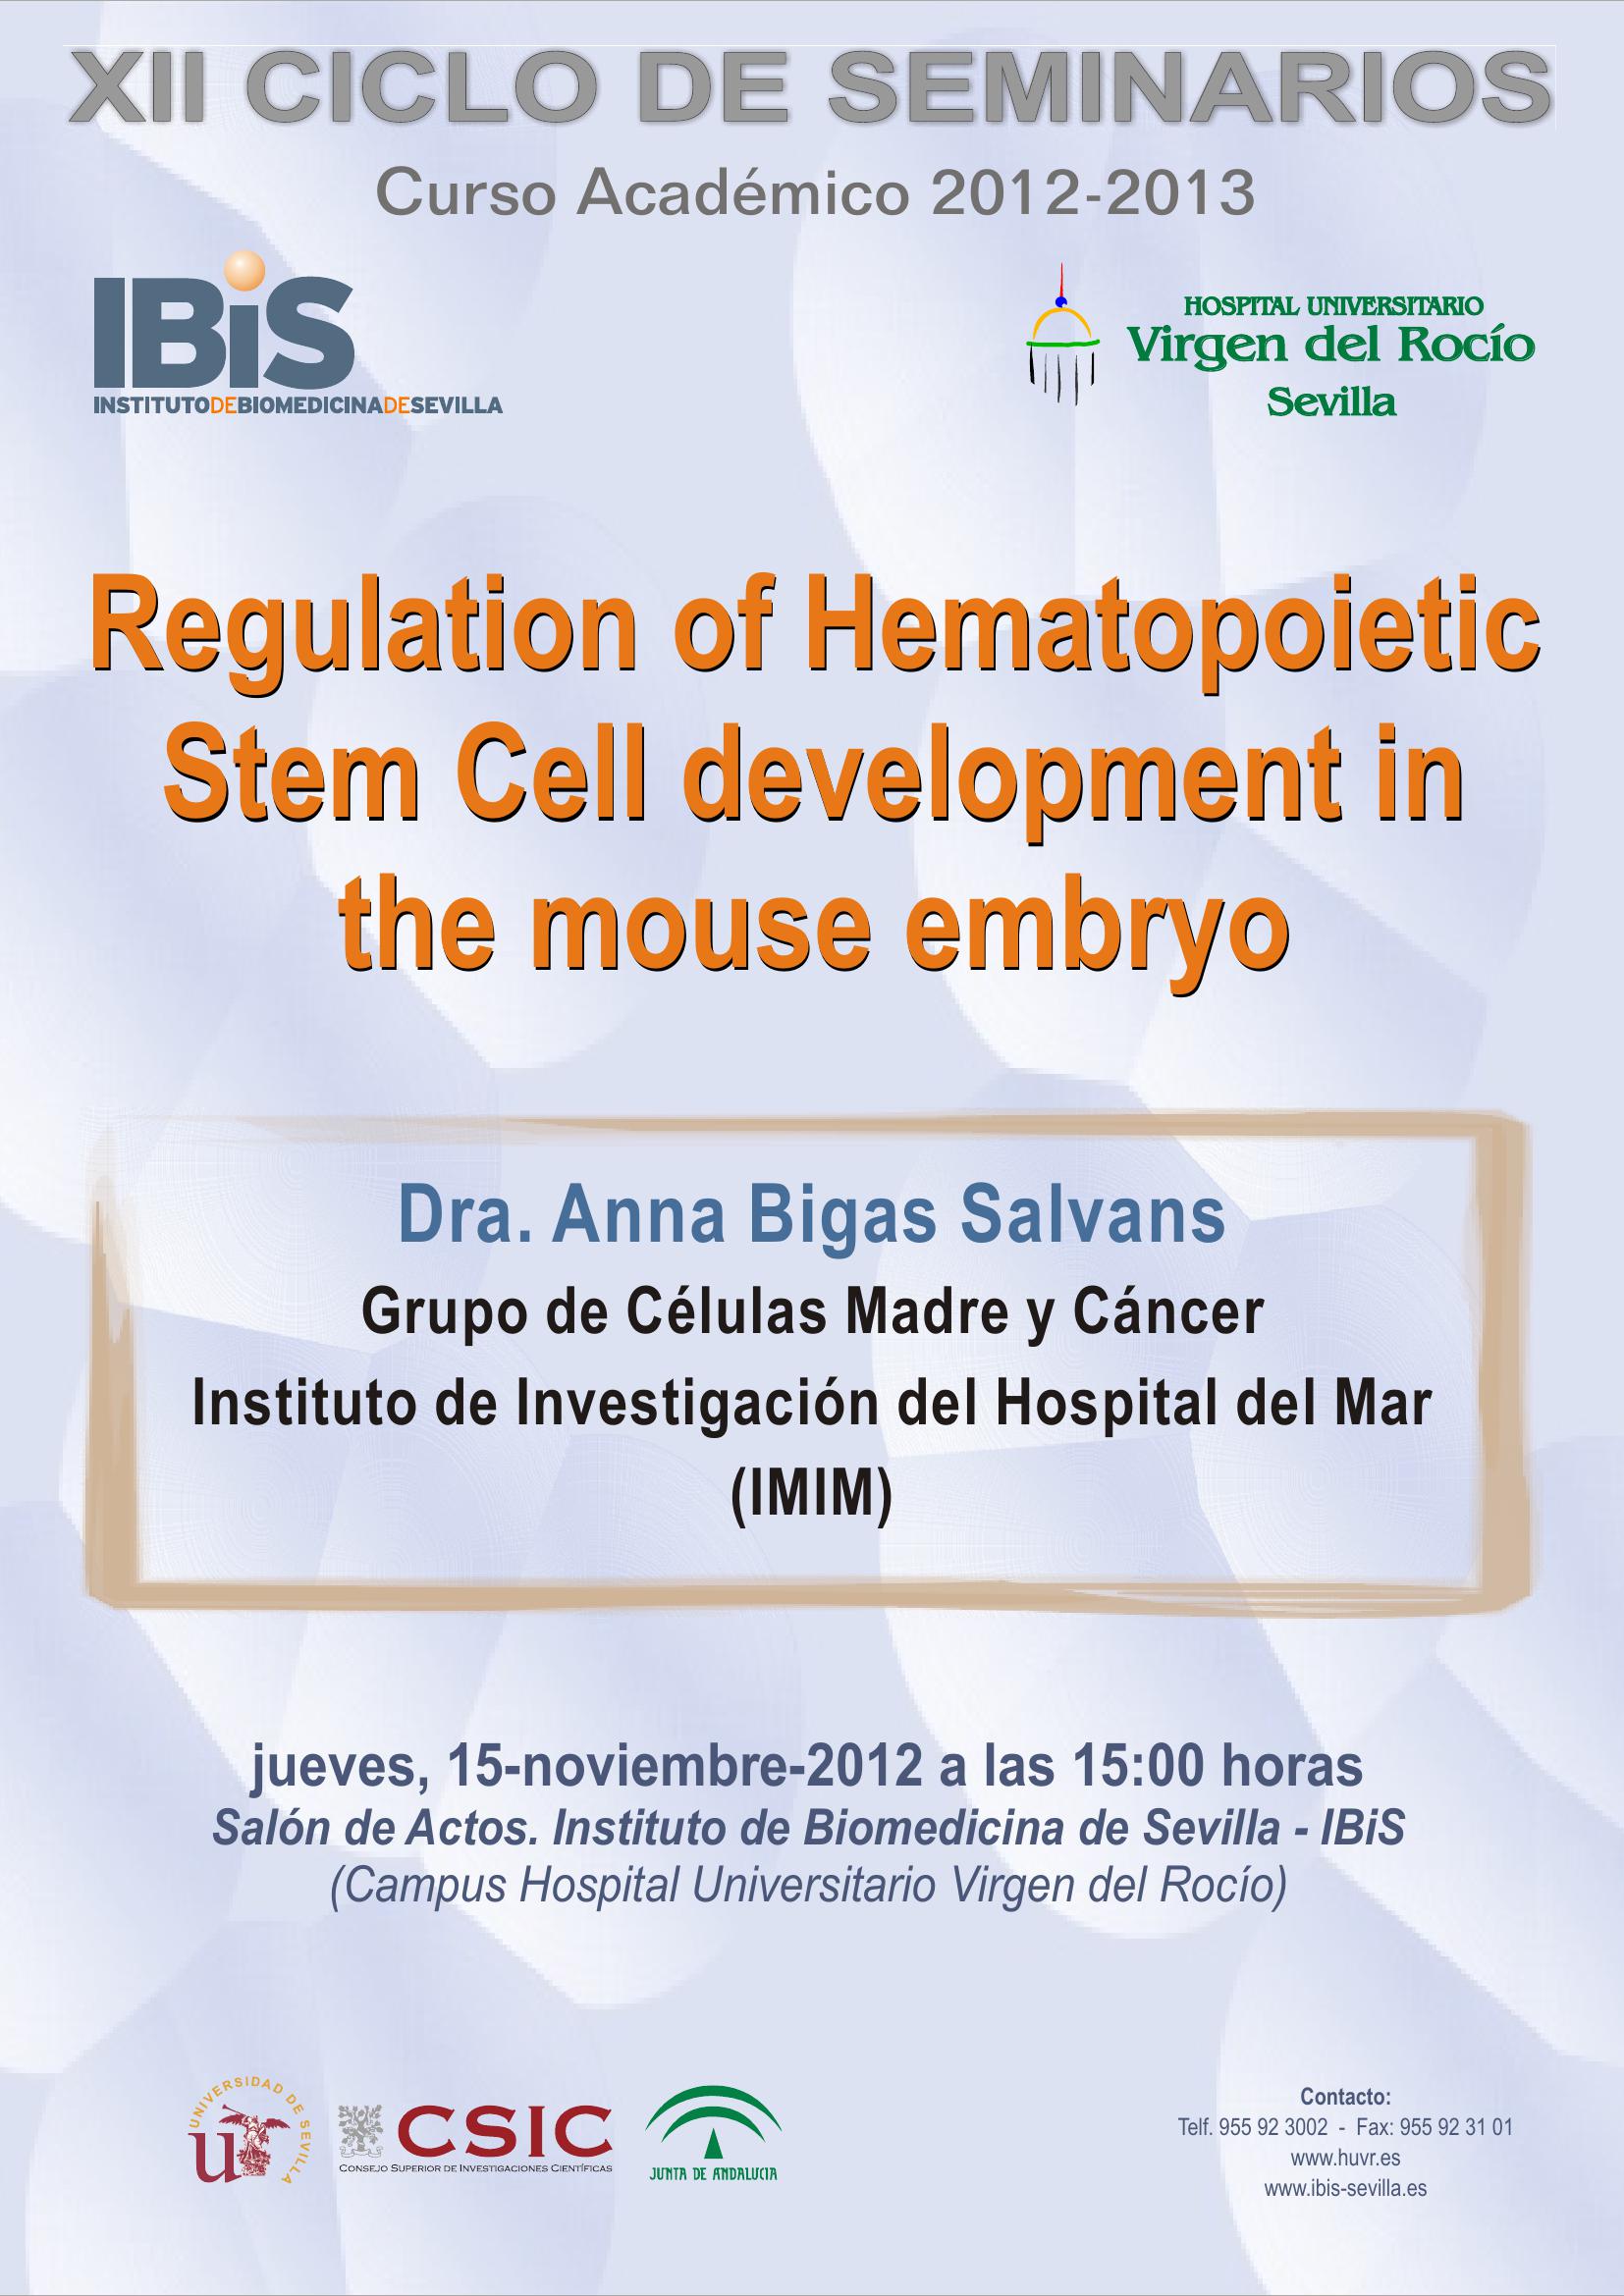 Poster: Regulation of Hematopoietic Stem Cell development in the mouse embryo.